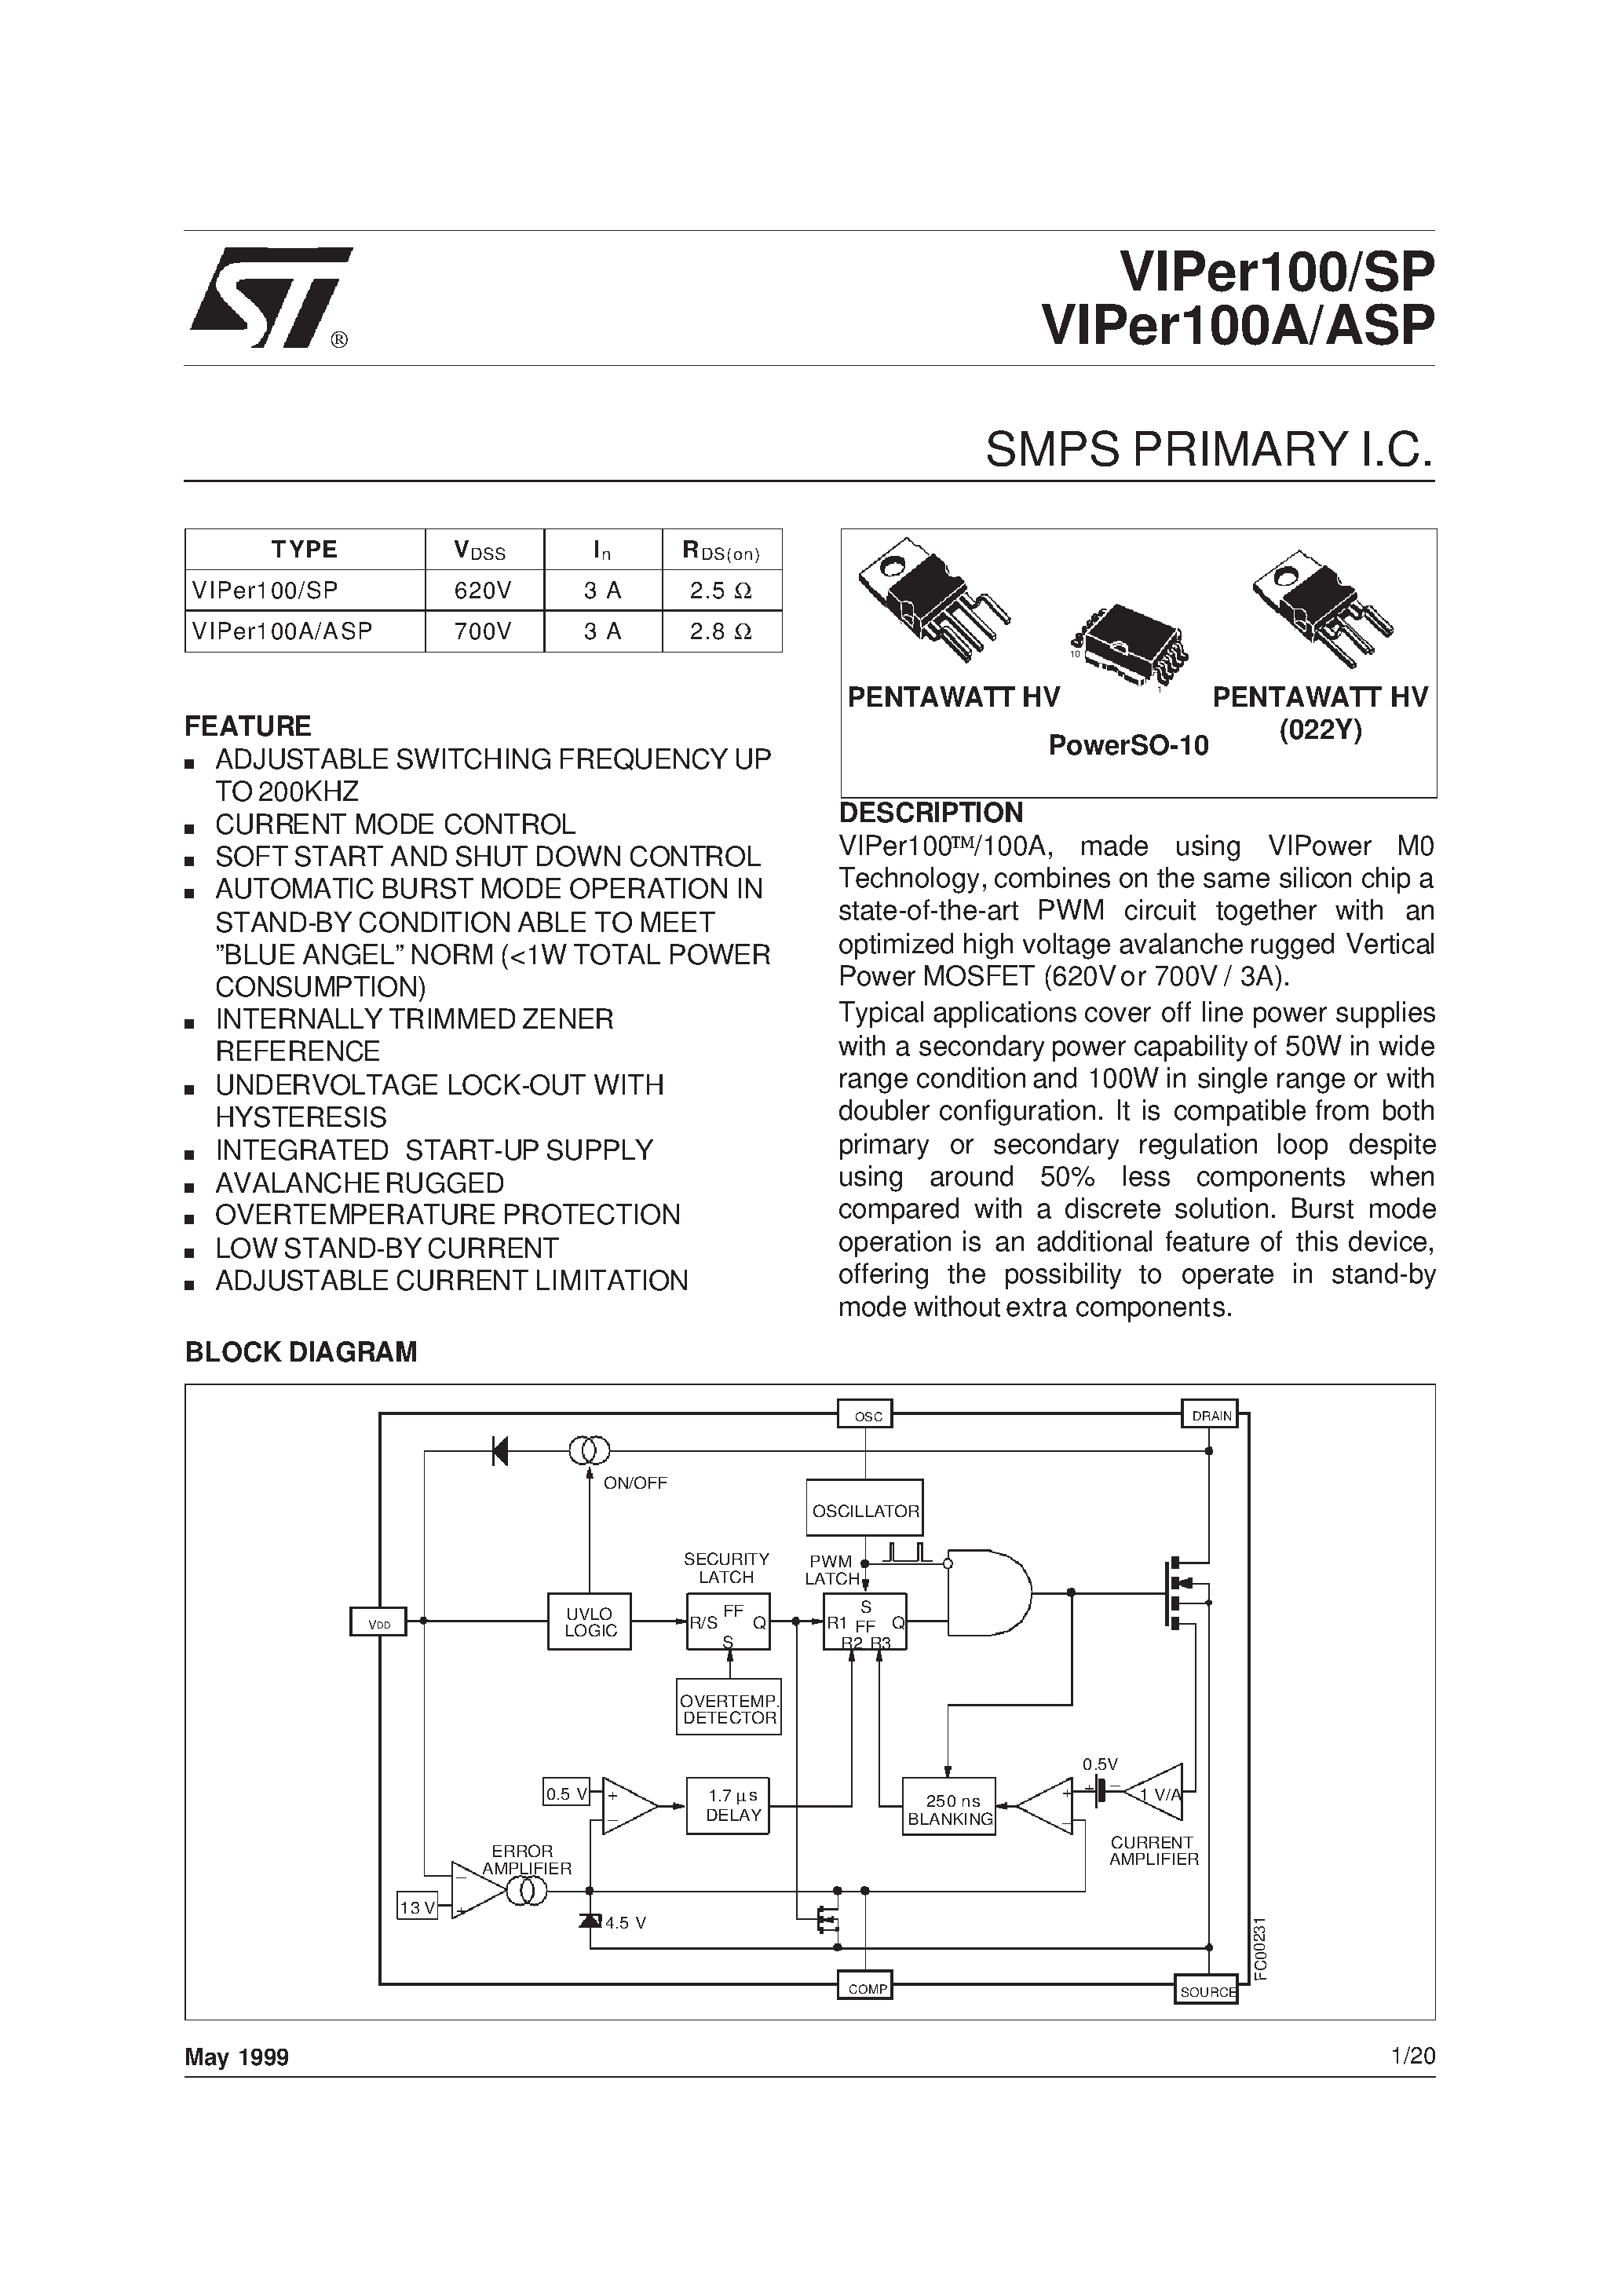 Datasheet VIPER100 - SMPS PRIMARY I.C. page 1